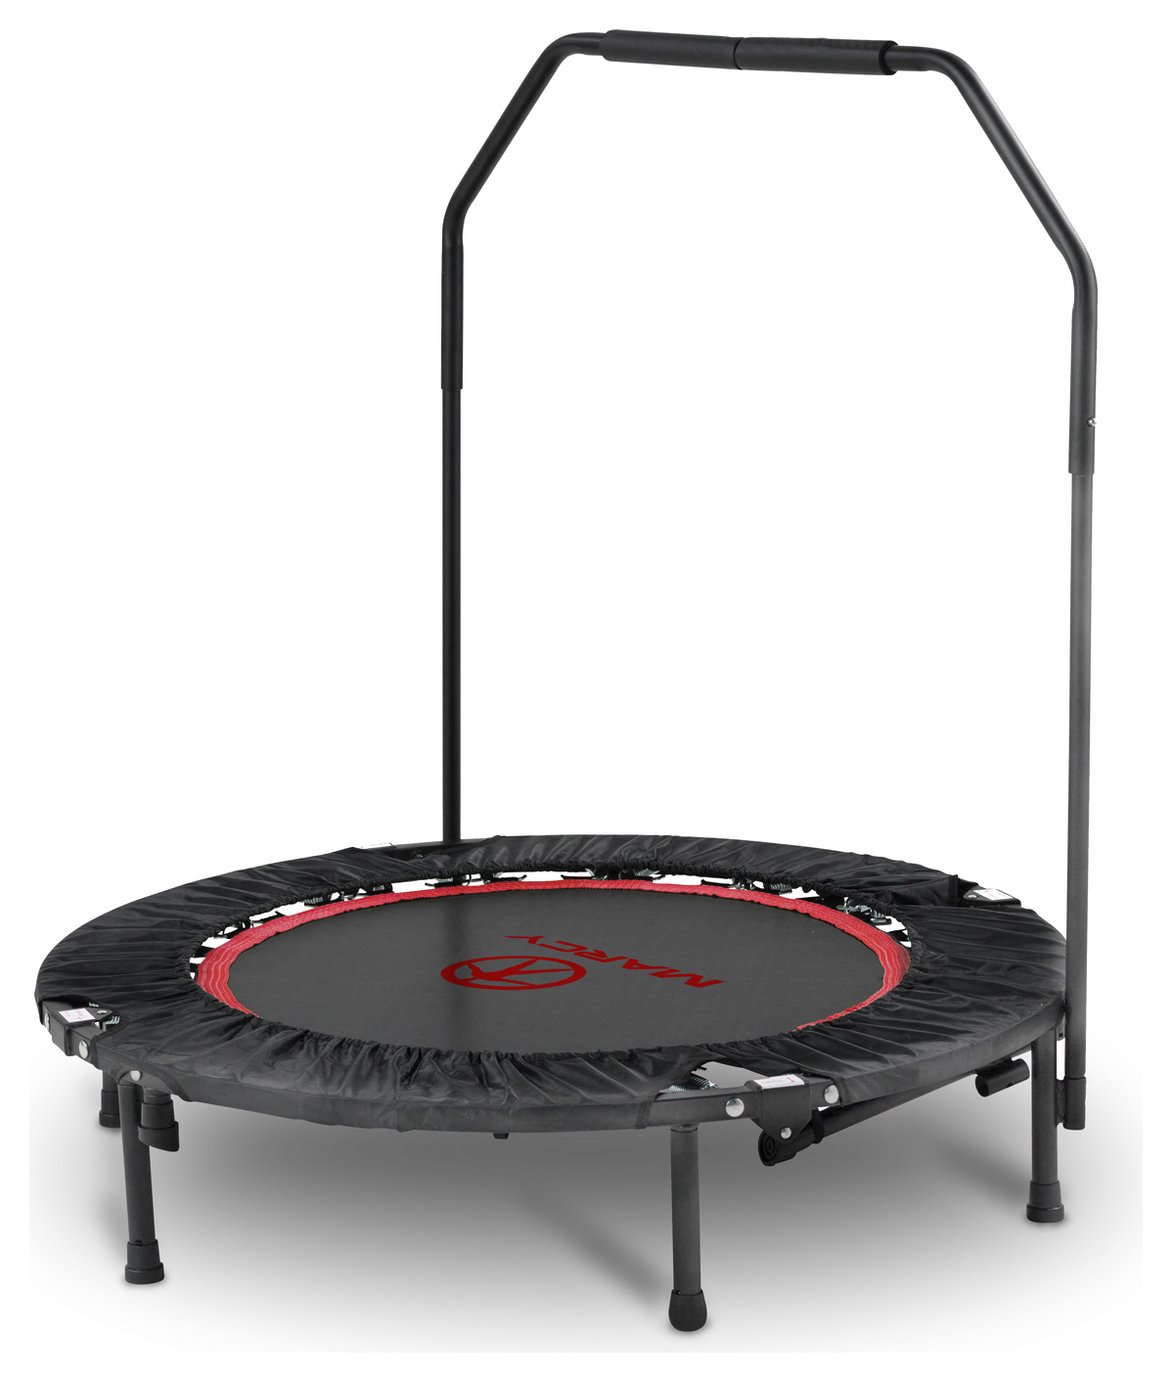 Marcy TR8001 Quick Folding Indoor Fitness Gym Trampoline